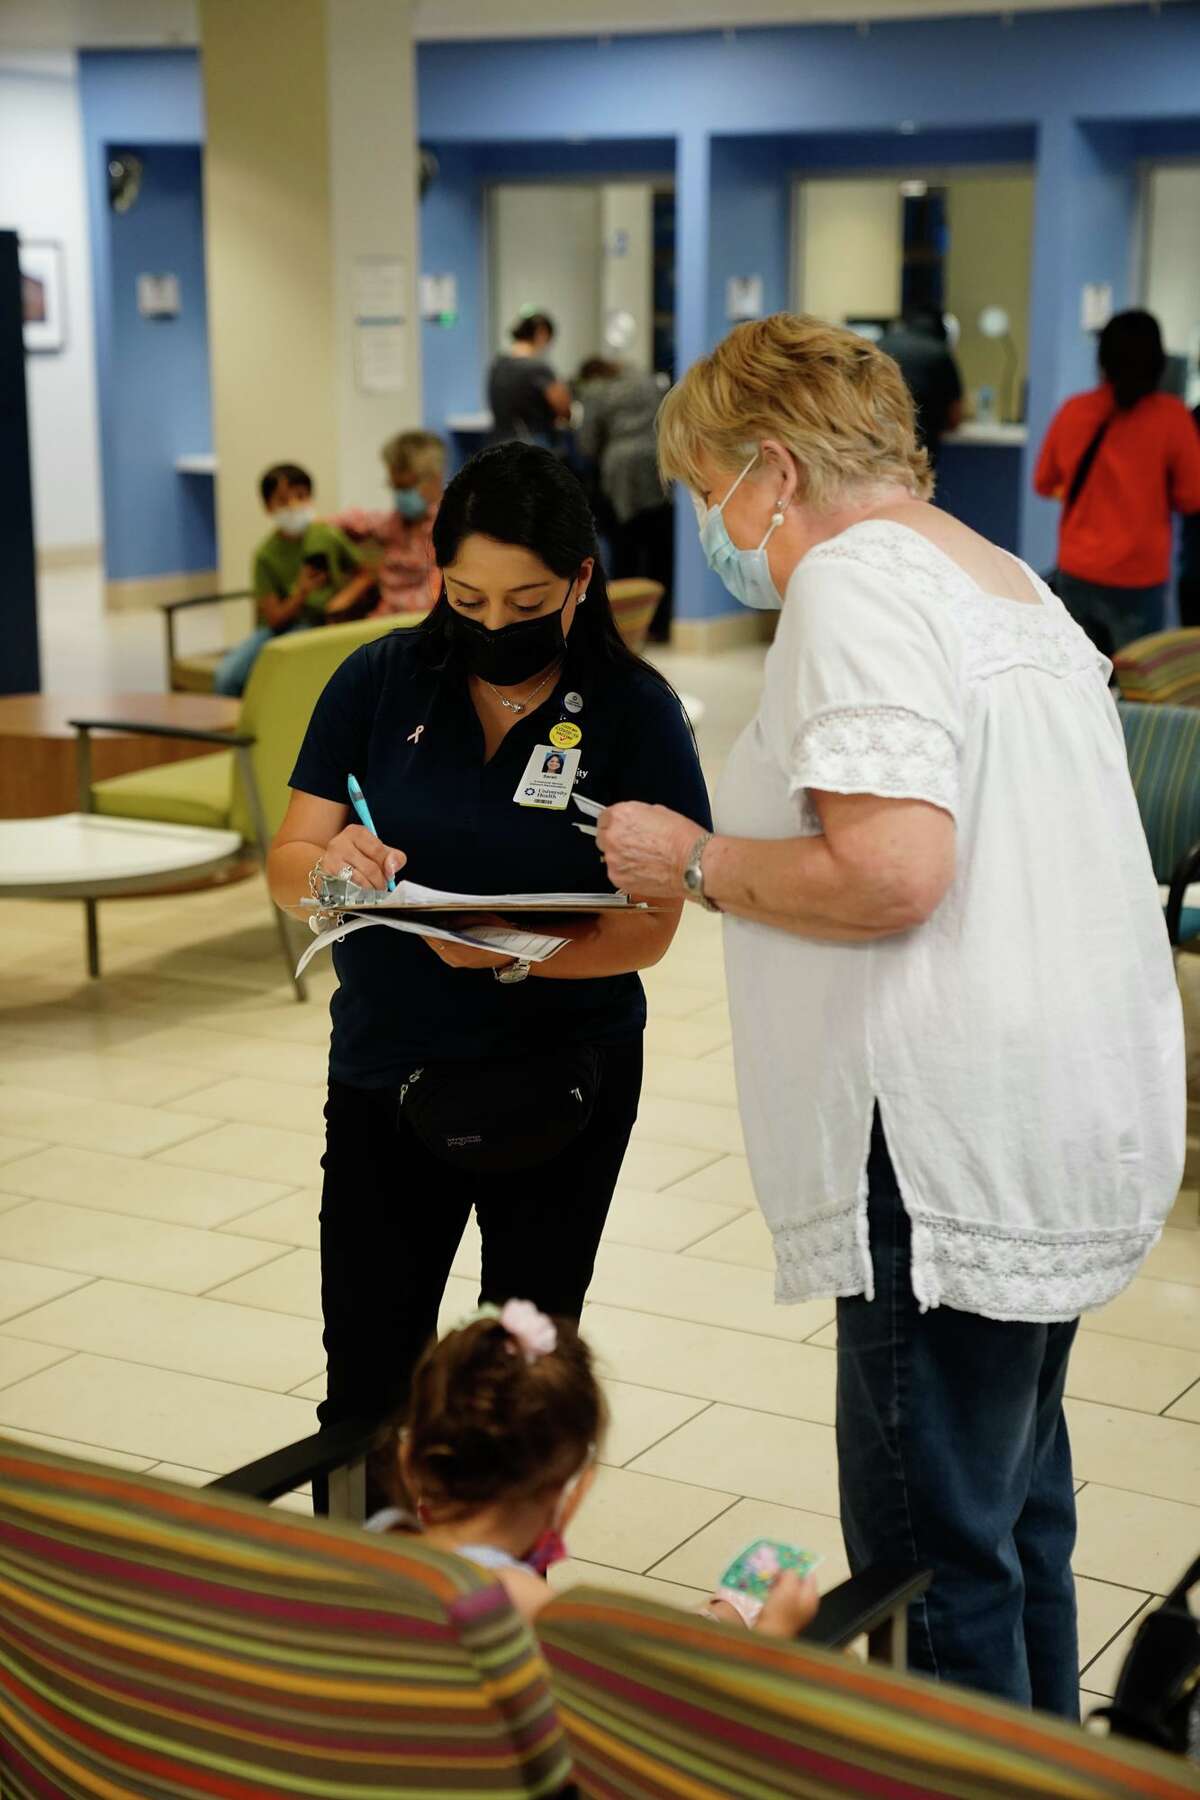 Sarah Trejo of University Health gets patient information during a vaccination clinic on Thursday sponsored by University Health at its Robert B. Green campus downtown.